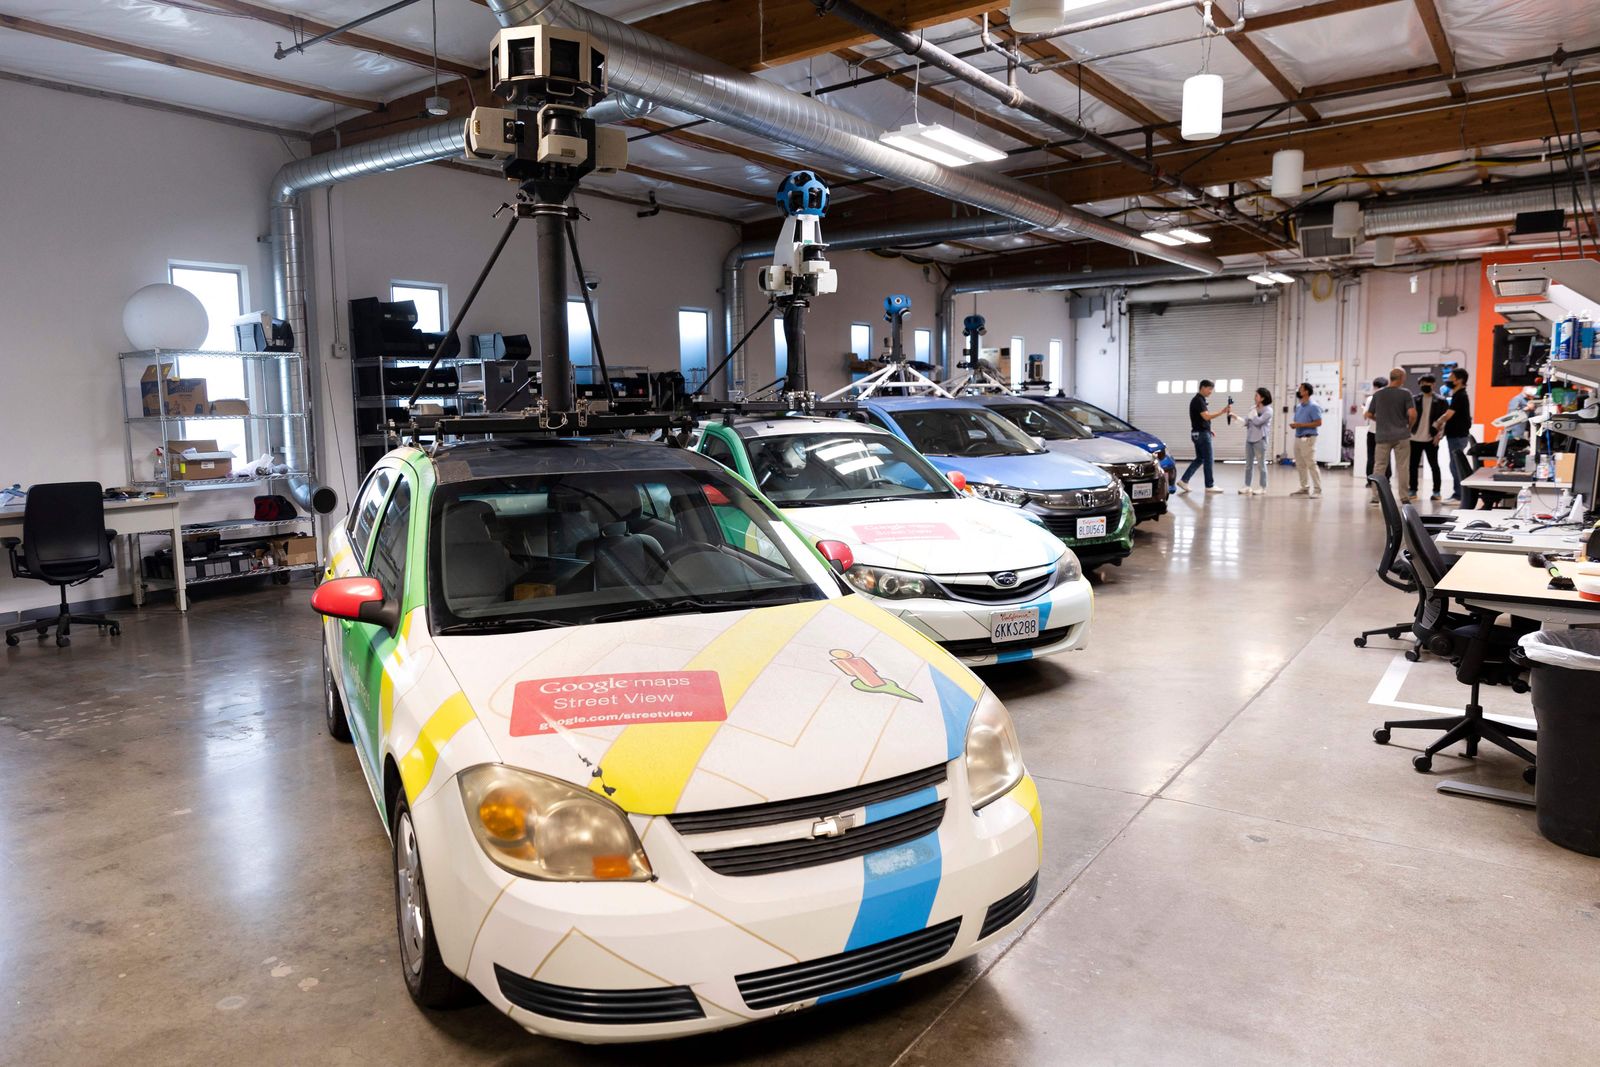 Several generations of Google Street View Cars are lined up on display at the Google Street View Garage in Mountain View, California on August 29, 2022. - 2022 marks the 15th anniversary of Google Maps� Street View. (Photo by Brittany Hosea-Small / AFP)